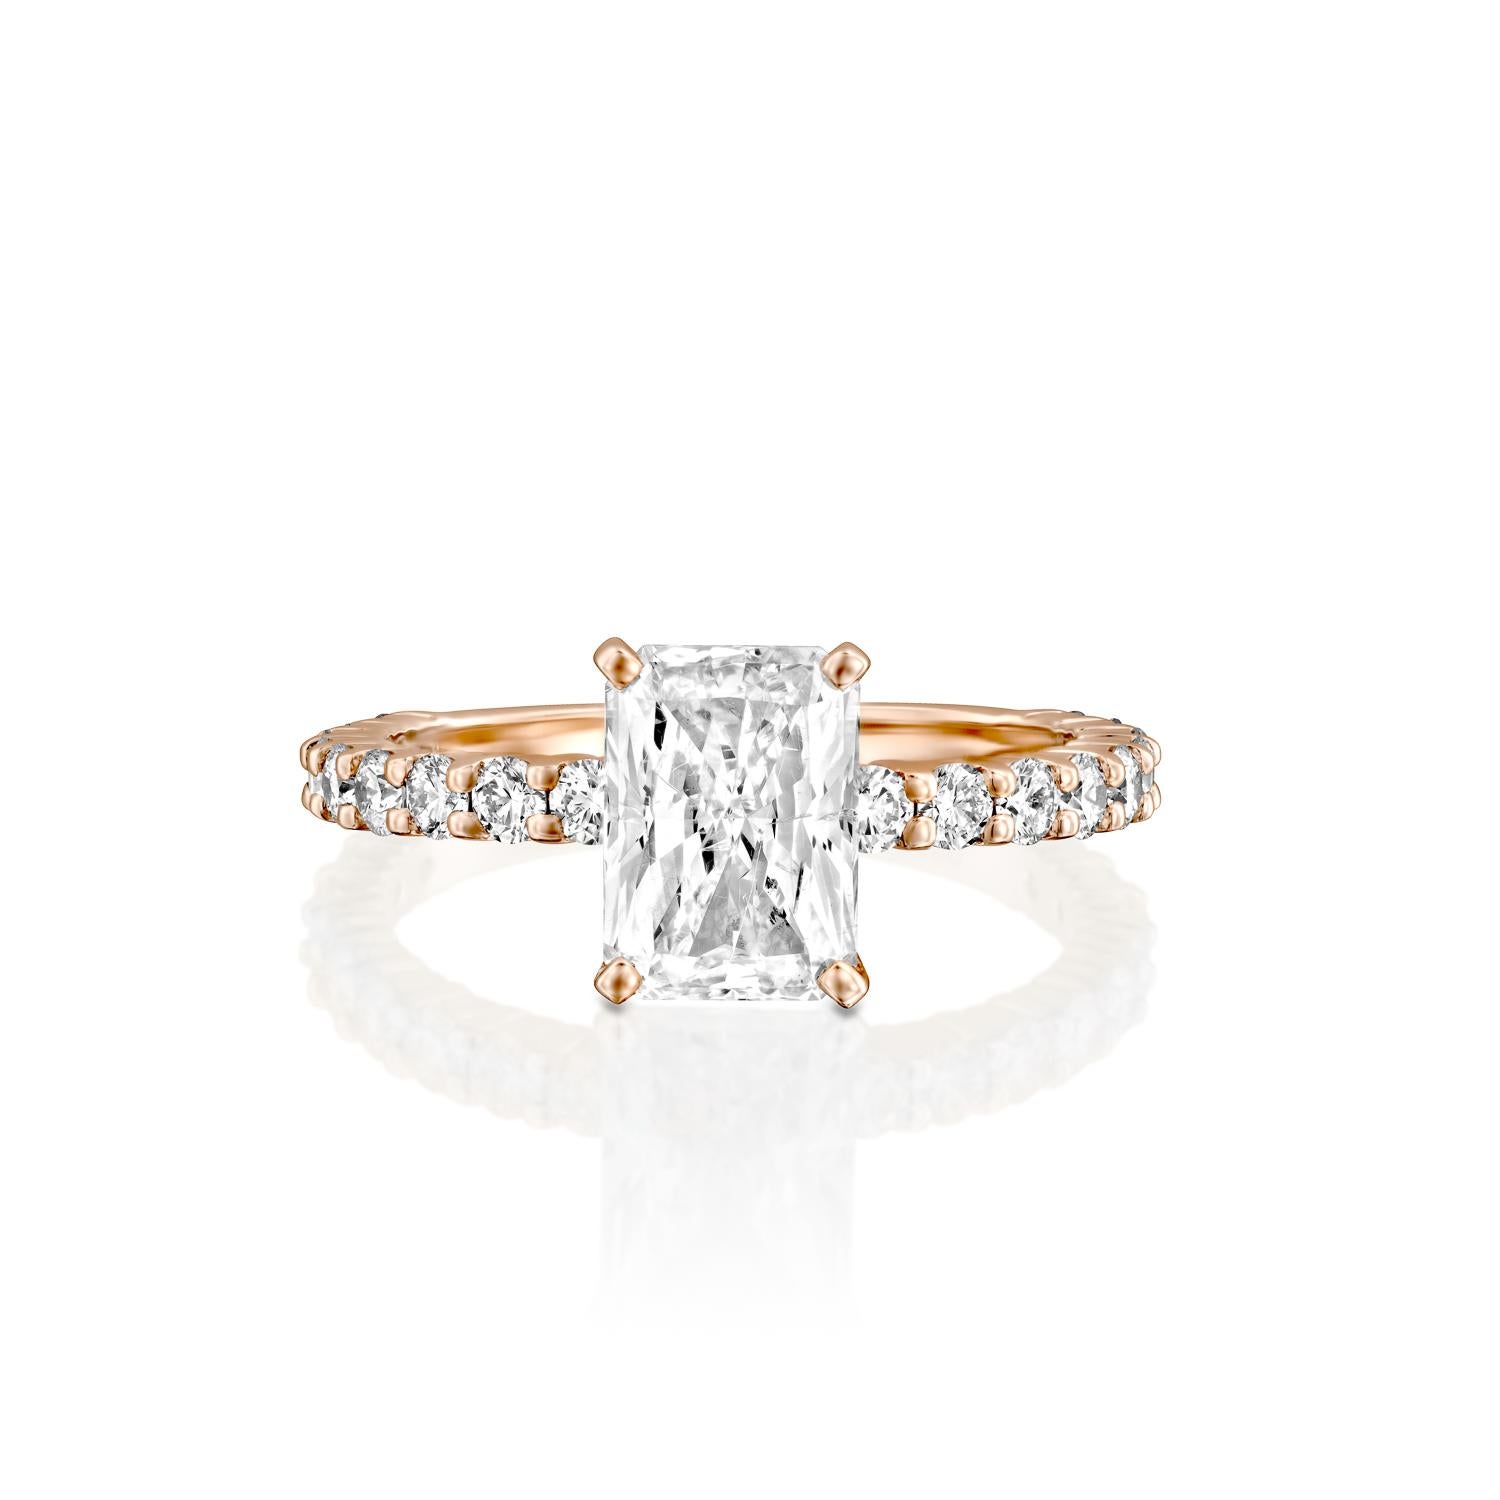 This impressive ring features a solitaire GIA certified diamond. Center stone is 100% eye clean natural, radiant shaped 1.5 carat diamond of F-G color and VS2-SI1 clarity and it is surrounded by smaller natural round diamonds of 0.90 total carat